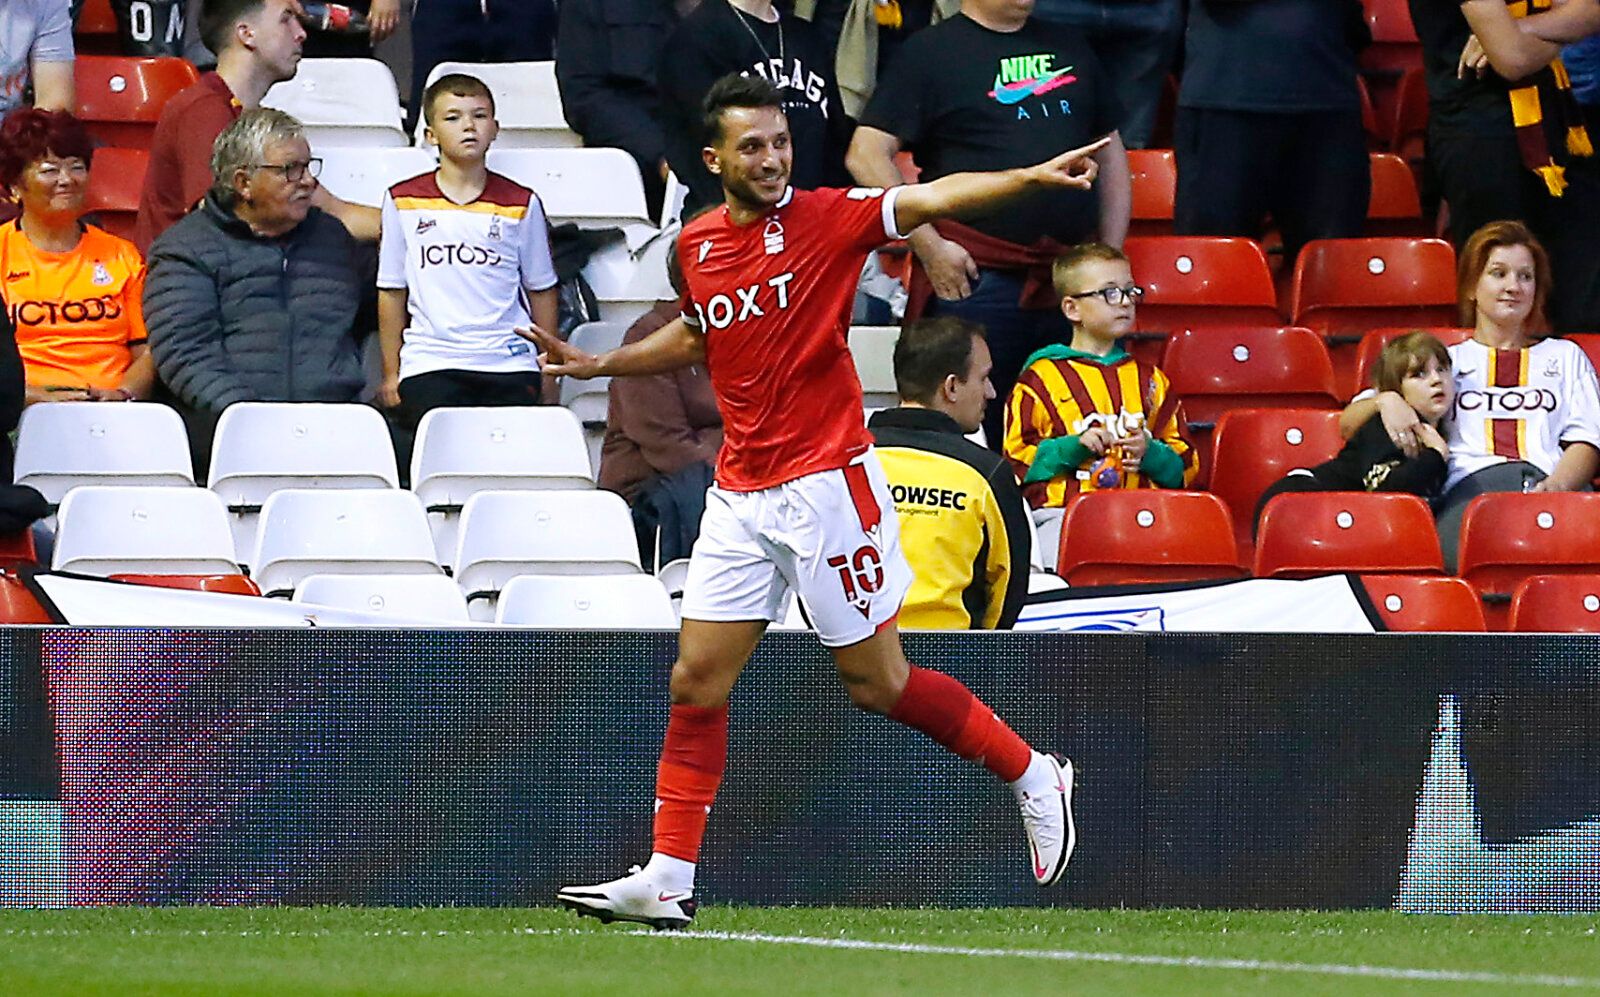 Soccer Football - Carabao Cup - First Round - Nottingham Forest v Bradford City - The City Ground, Nottingham, Britain - August 11, 2021 Nottingham Forest's Joao Carvalho celebrates scoring their second goal Action Images/Craig Brough EDITORIAL USE ONLY. No use with unauthorized audio, video, data, fixture lists, club/league logos or 'live' services. Online in-match use limited to 75 images, no video emulation. No use in betting, games or single club /league/player publications.  Please contact 